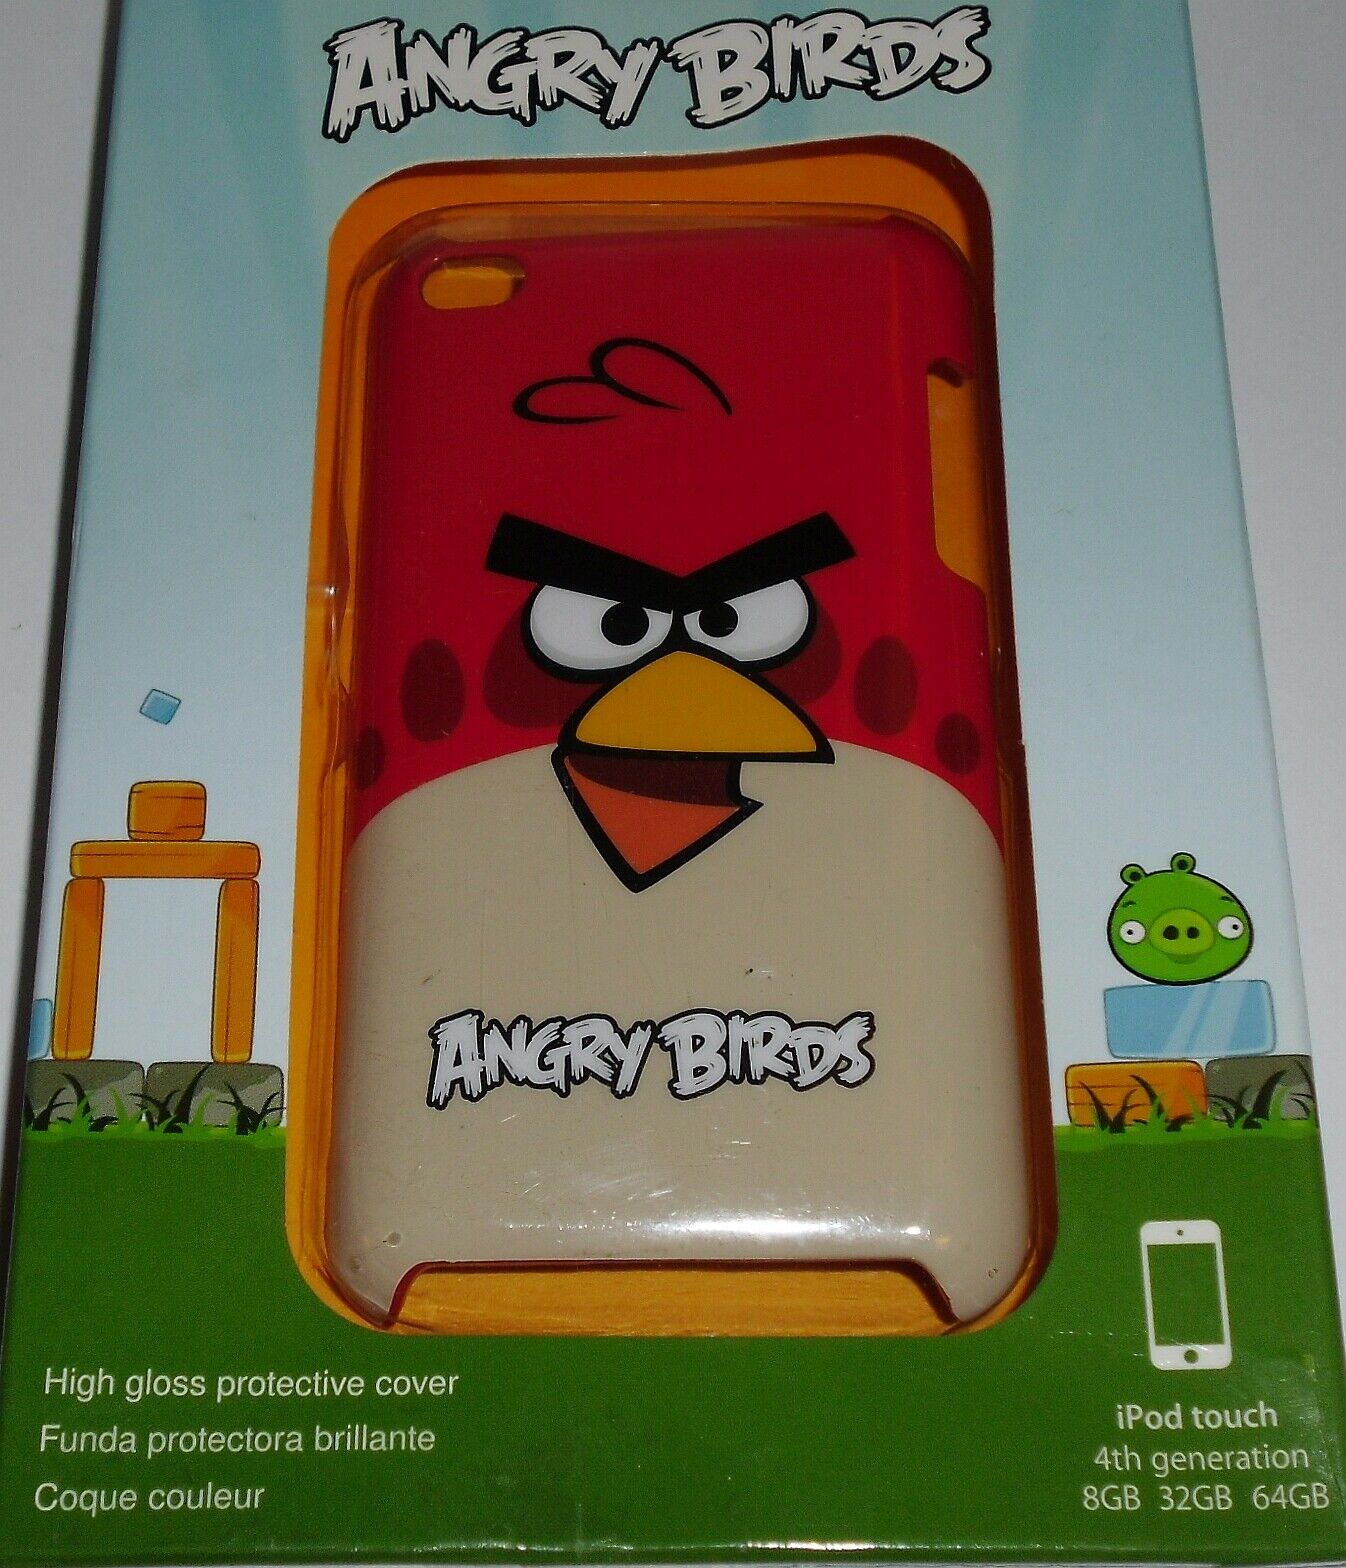 Gear4 Snap on Angry Birds Hard Thin Case for iPod touch 4G (Red Bird), Brand New